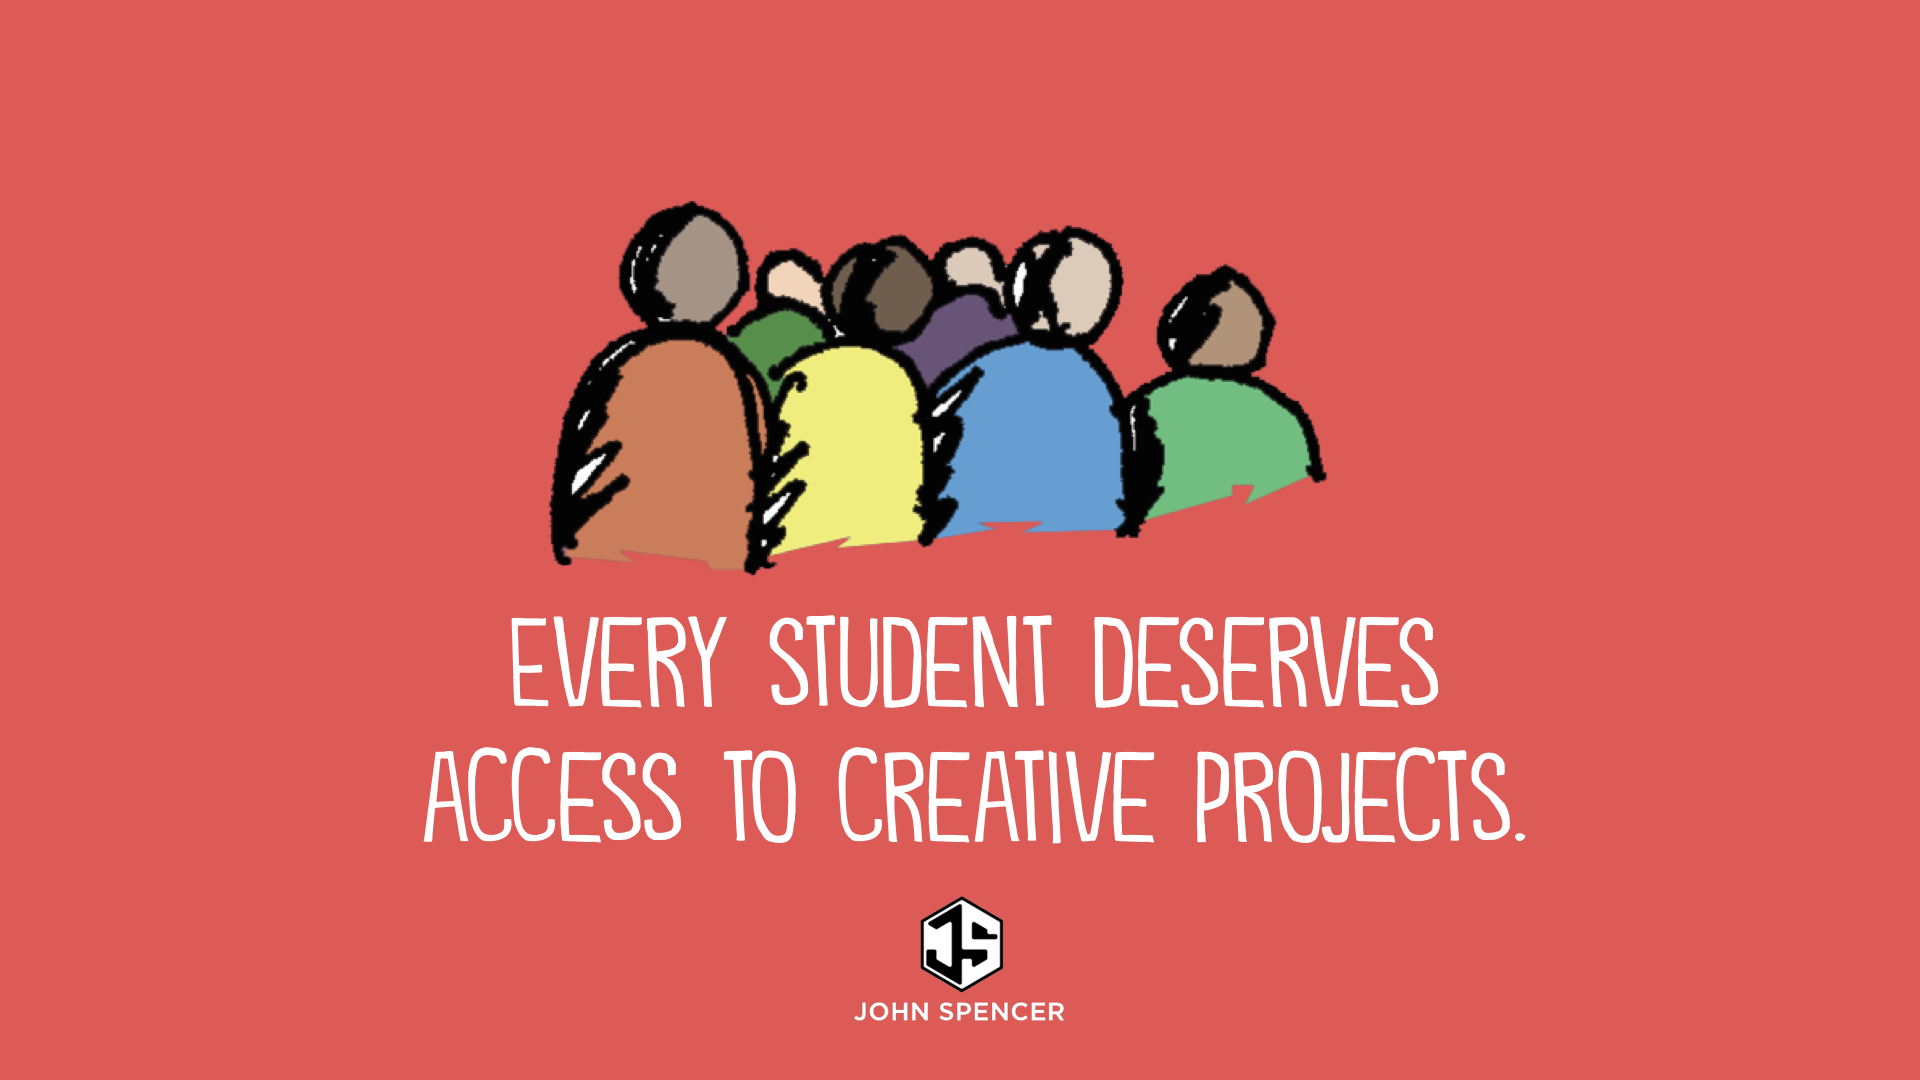 Seven Myths Keeping Teachers from Implementing Creative Projects